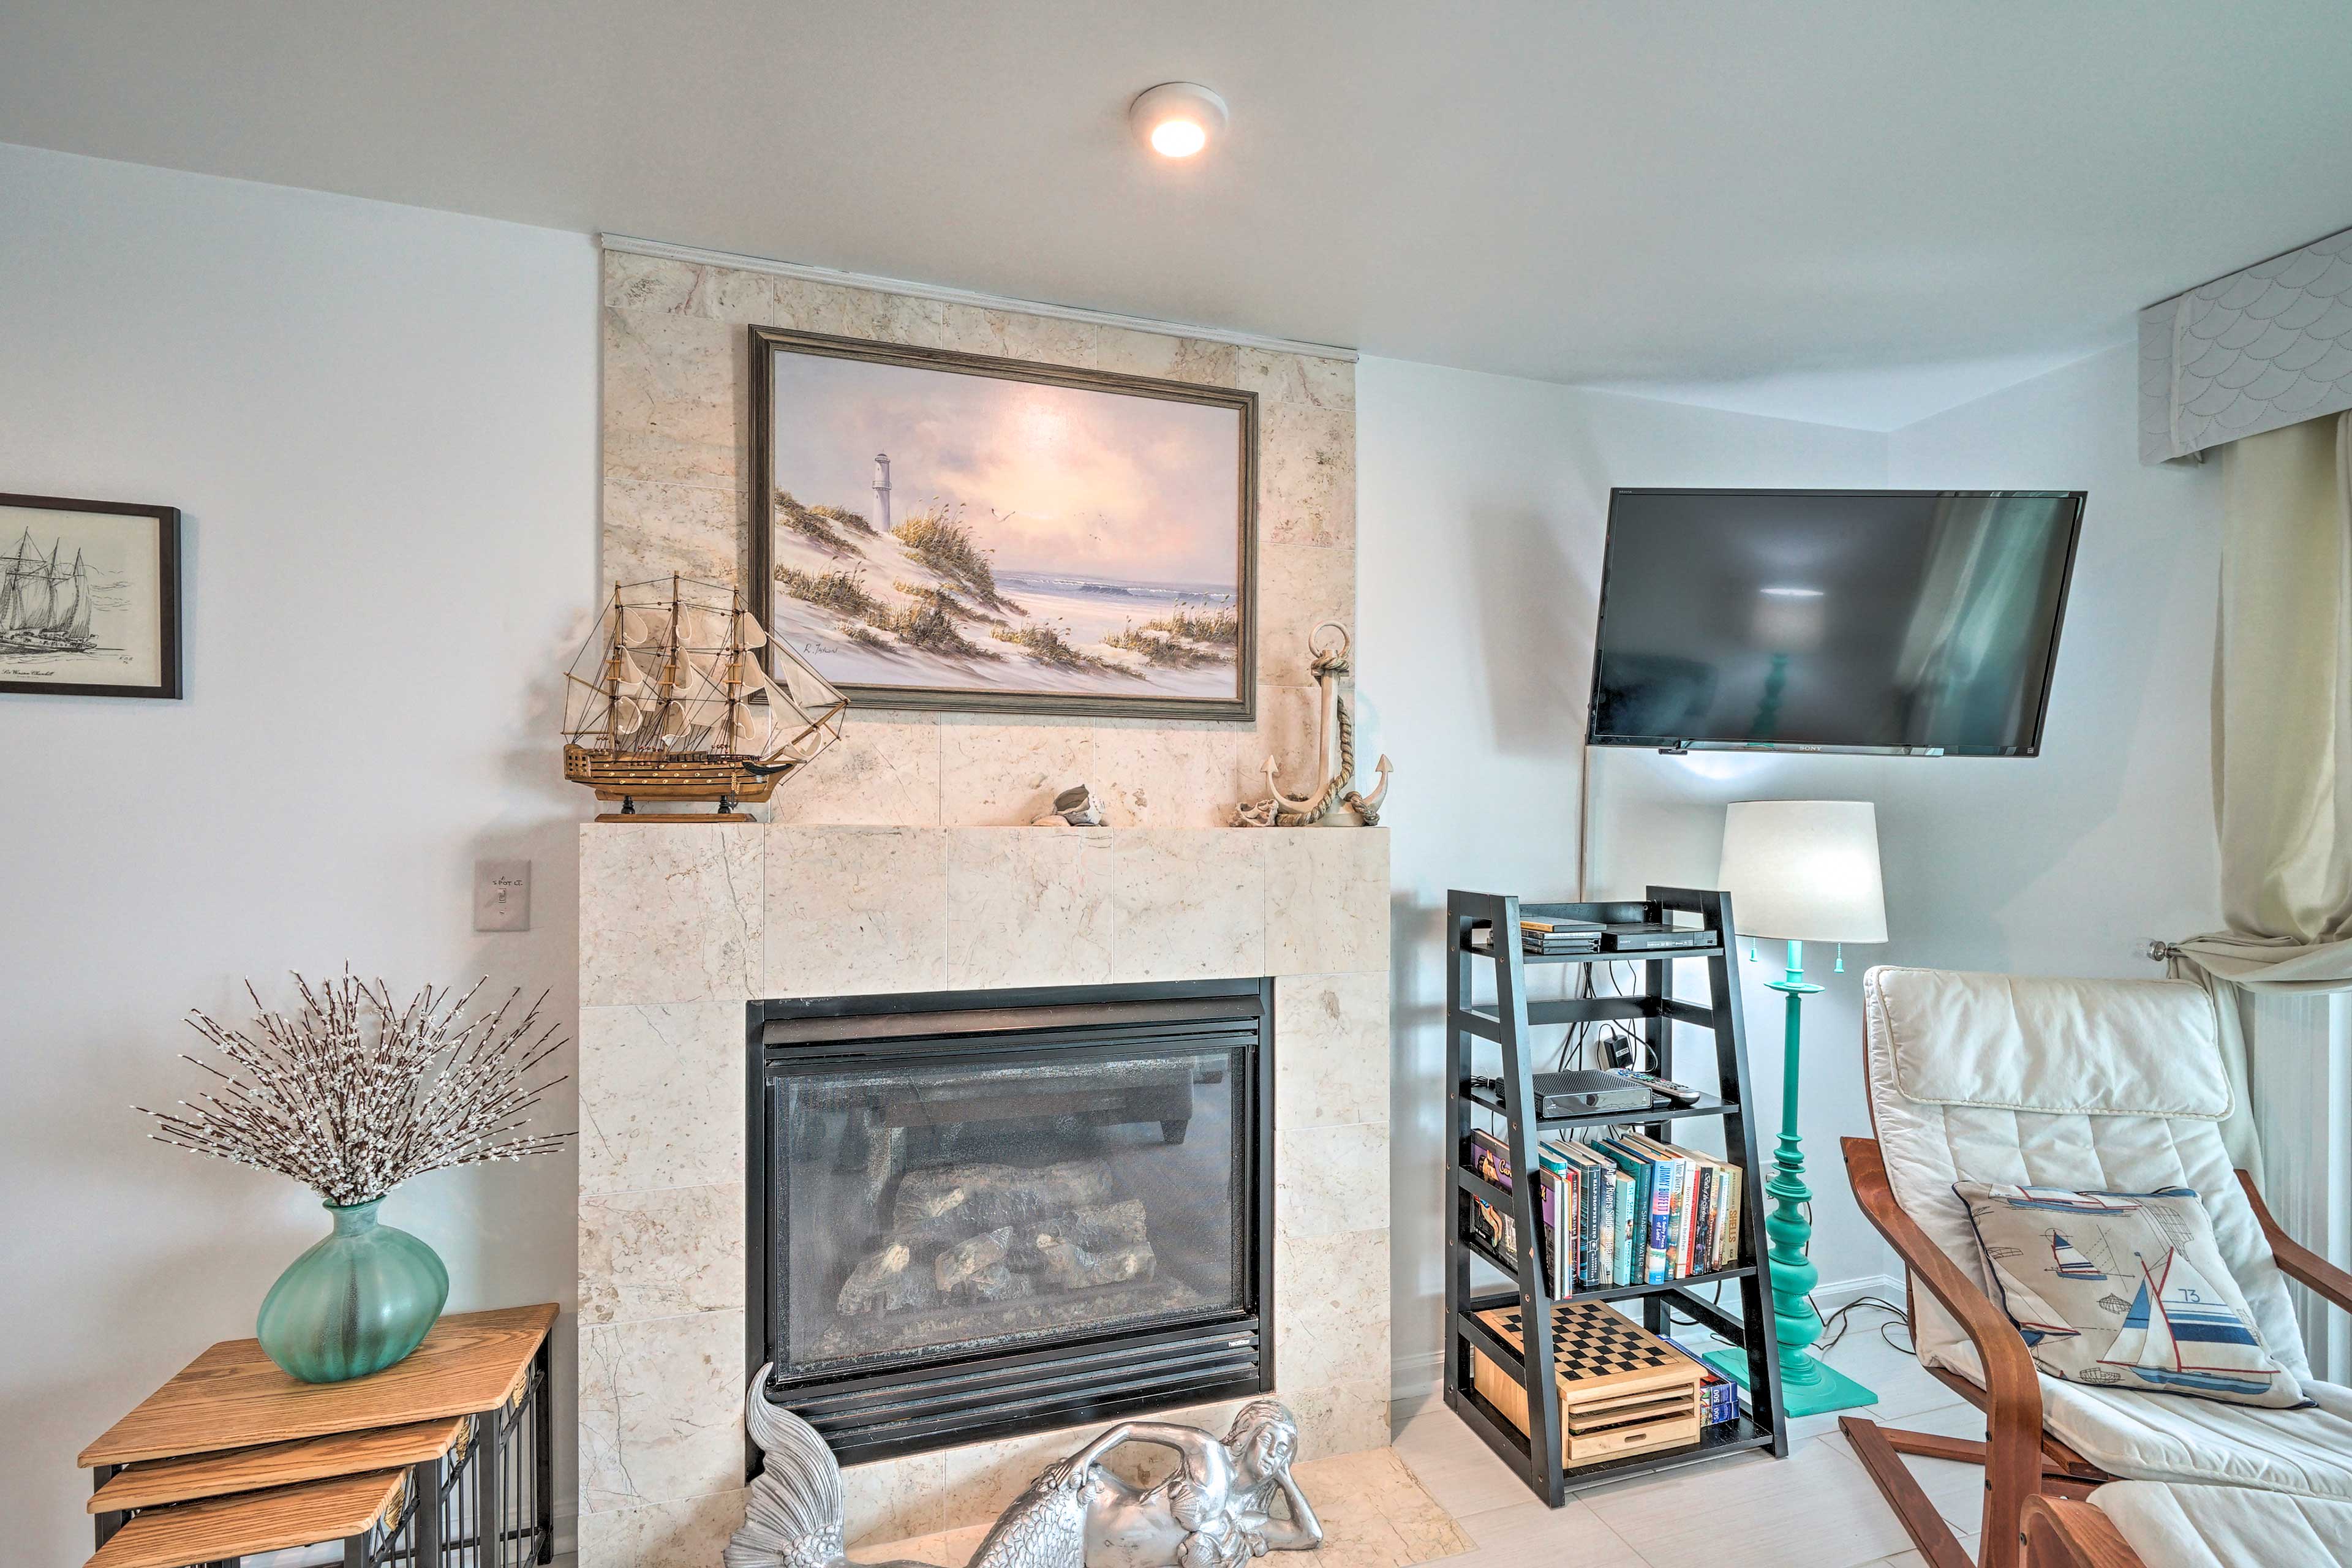 Visiting during winter? Curl up in front of the gas fireplace on chilly nights.